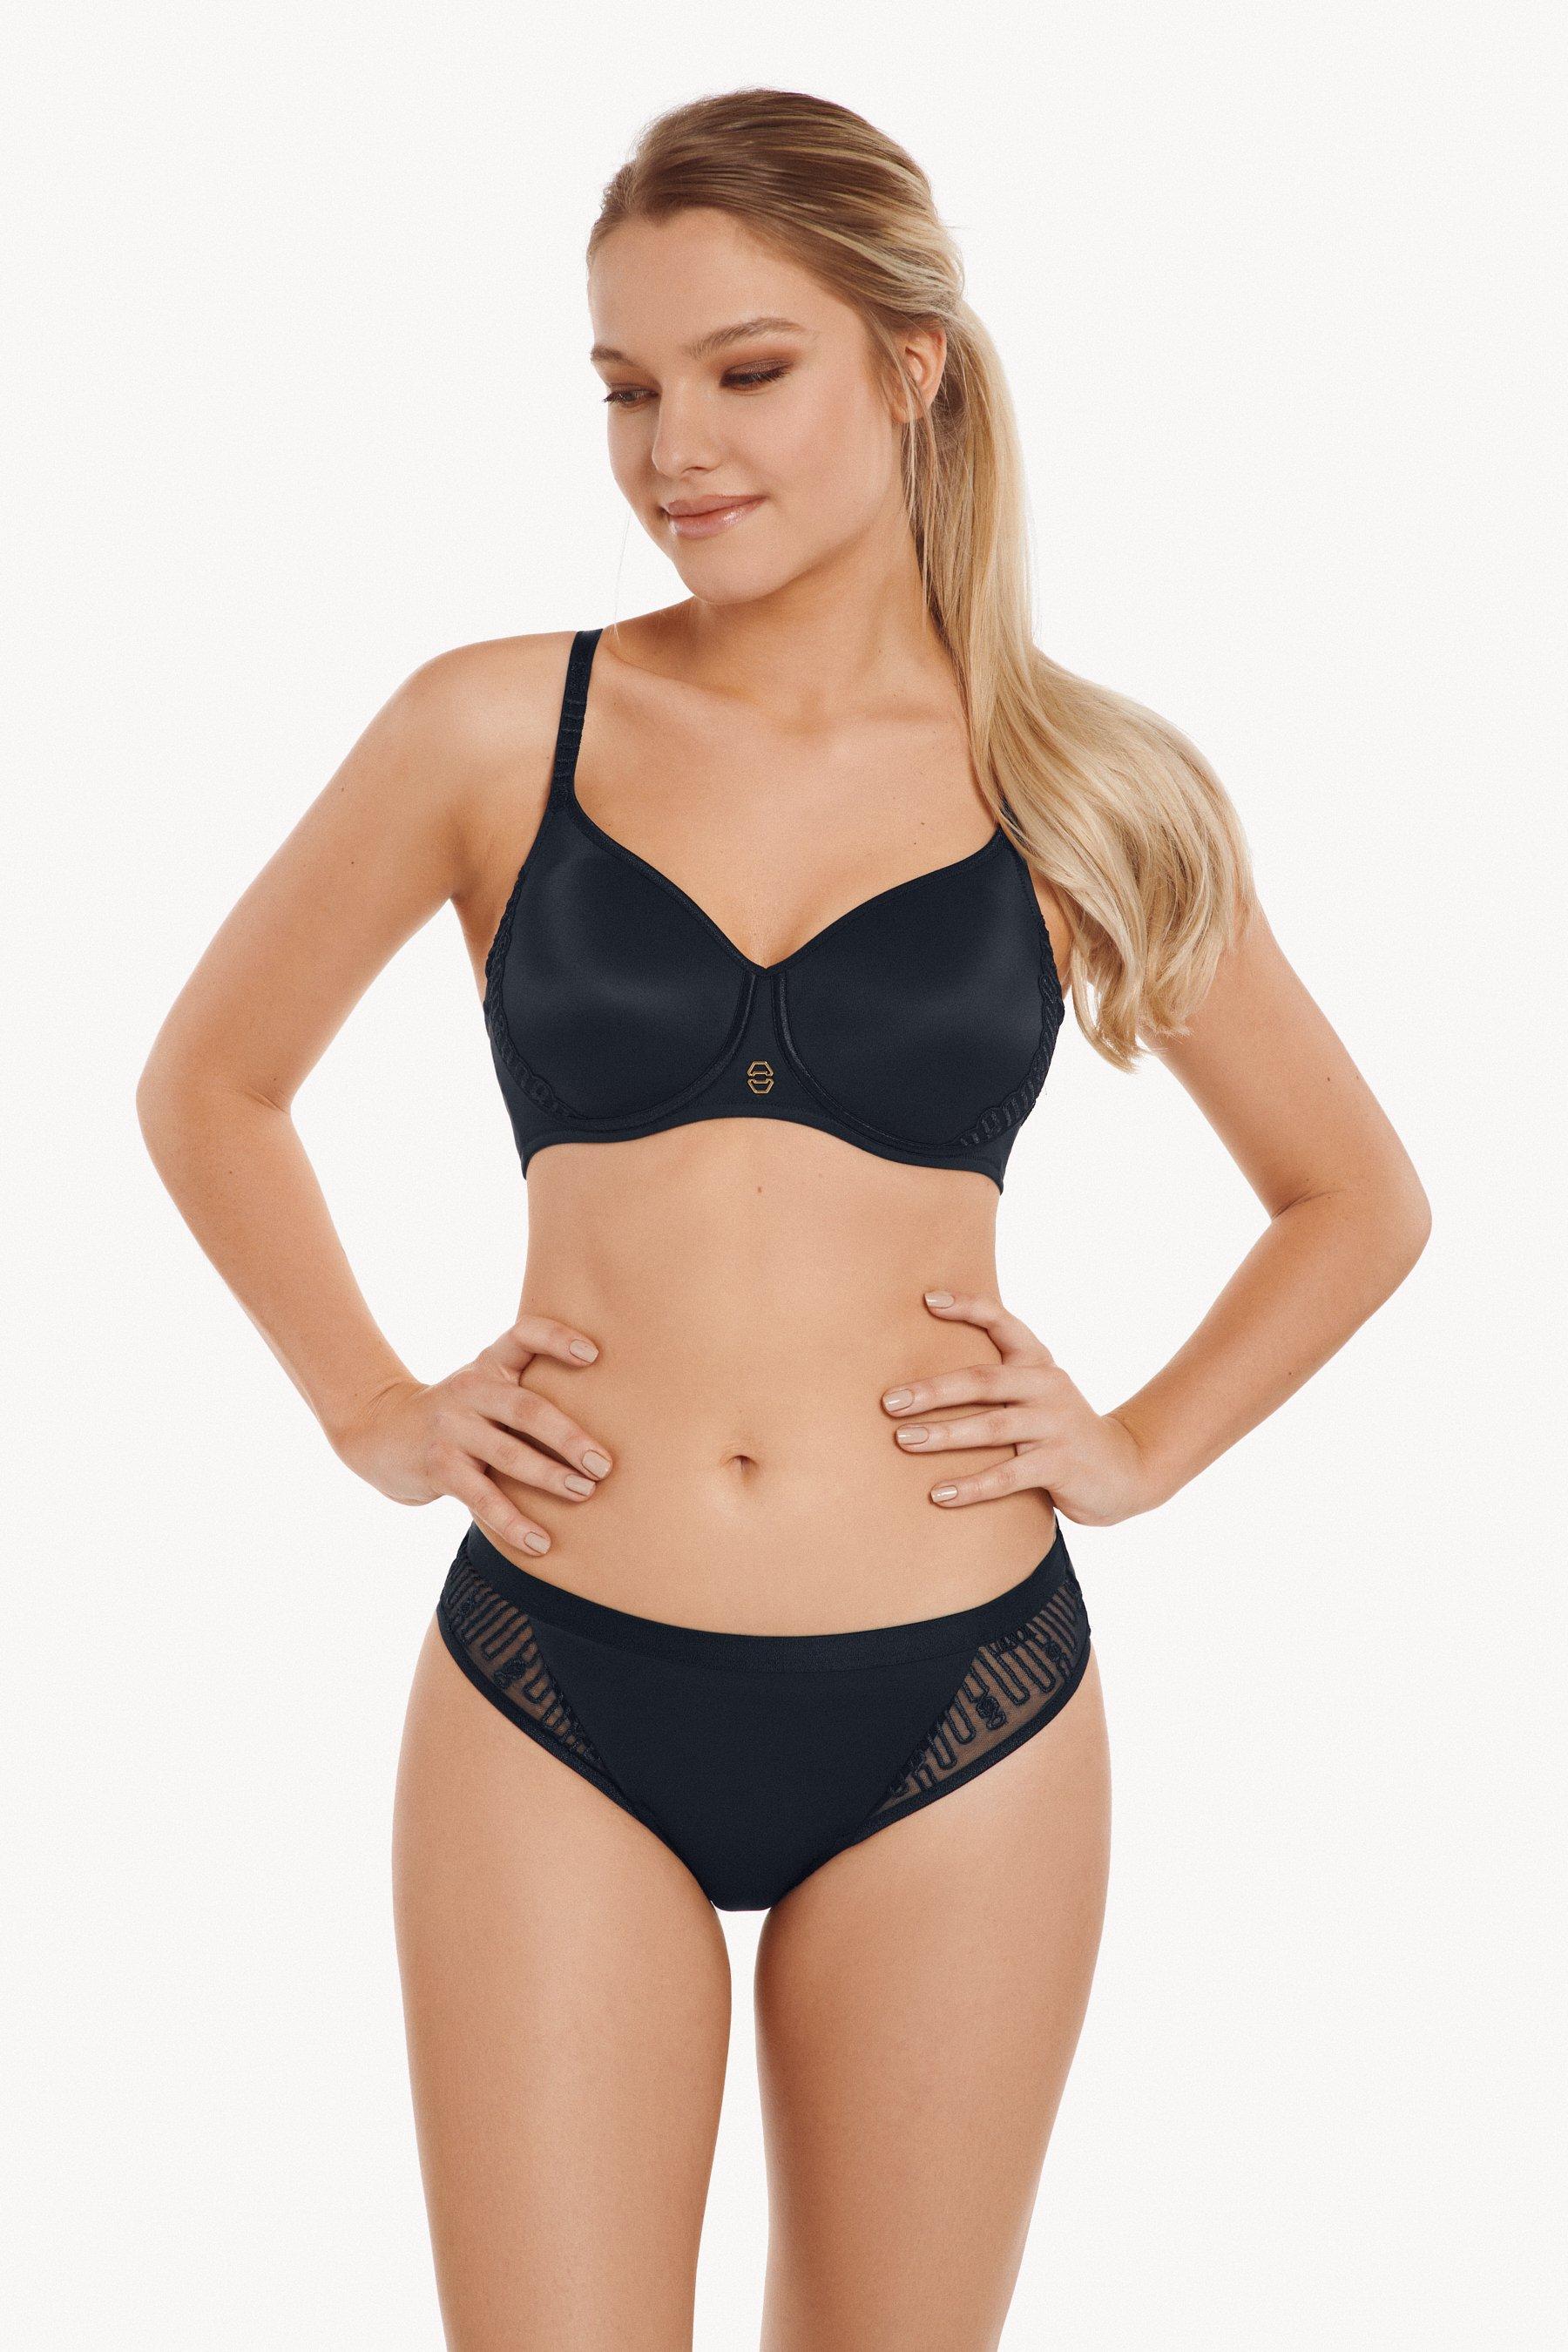 'Ivonne' Non-Wired Moulded Foam Cup T-shirt Bra